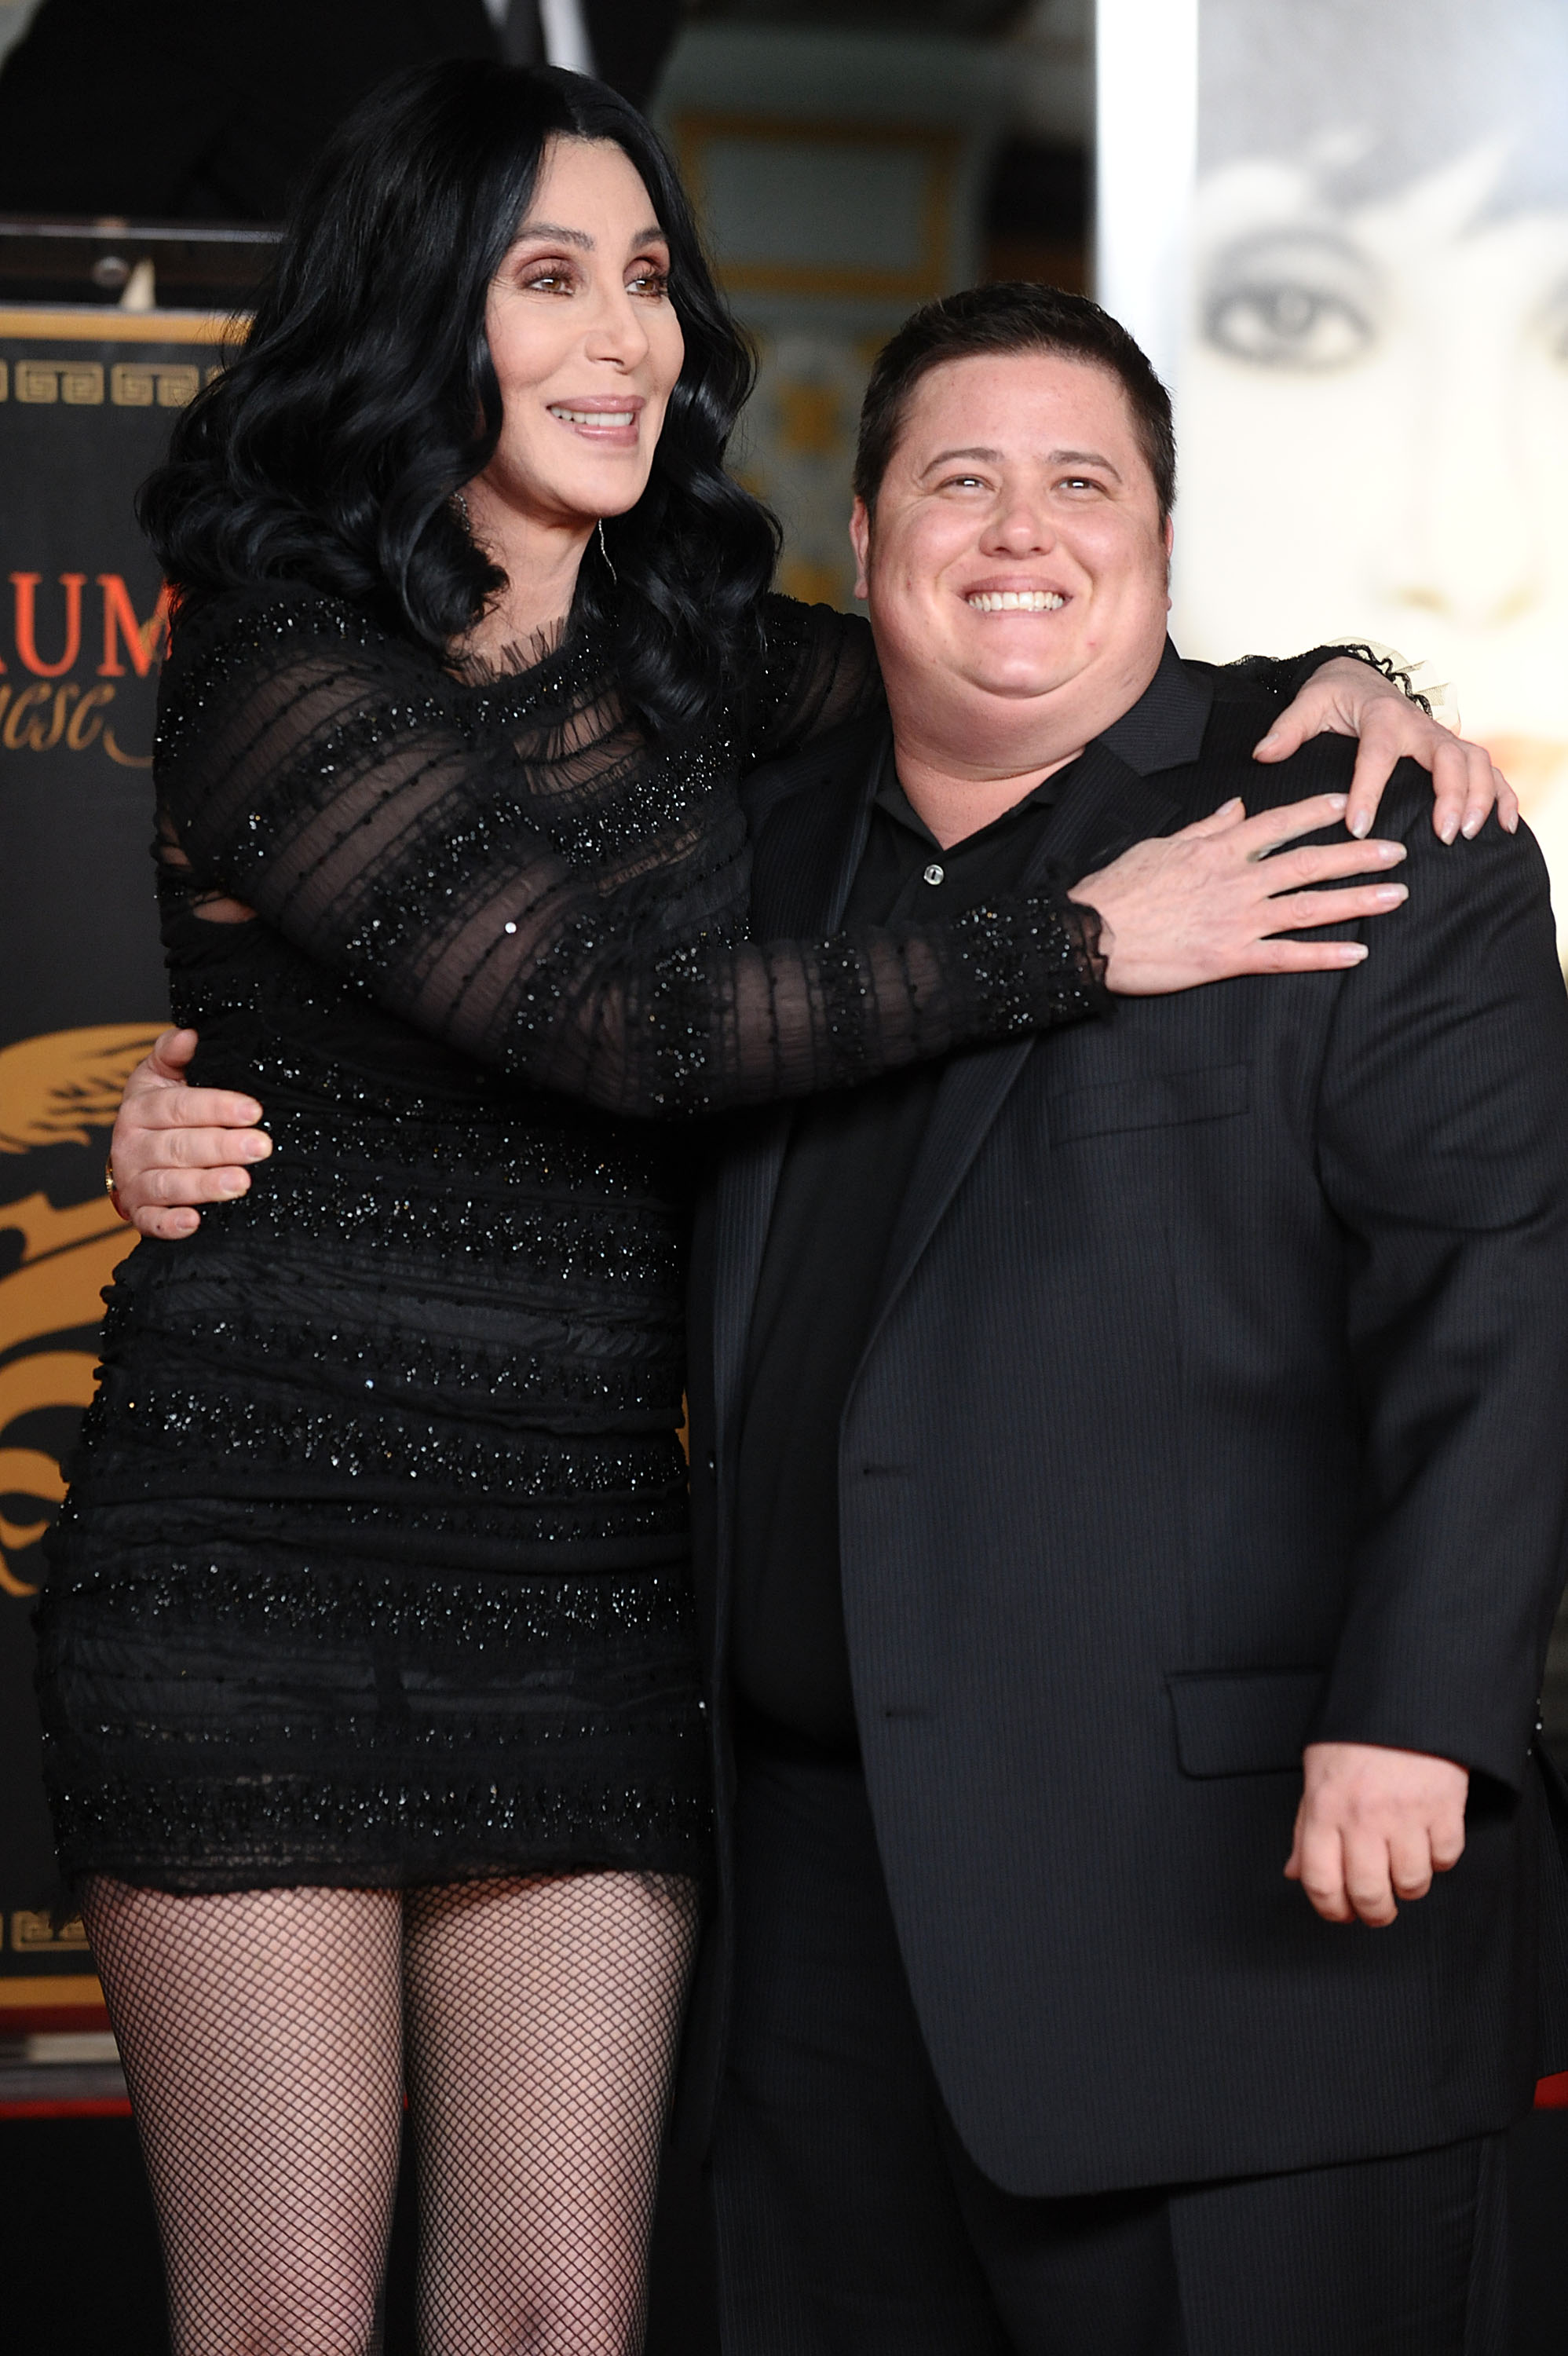 Cher and Chaz Bono attend Cher's hand and footprint ceremony in Hollywood, California, on November 18, 2010. | Source: Getty Images